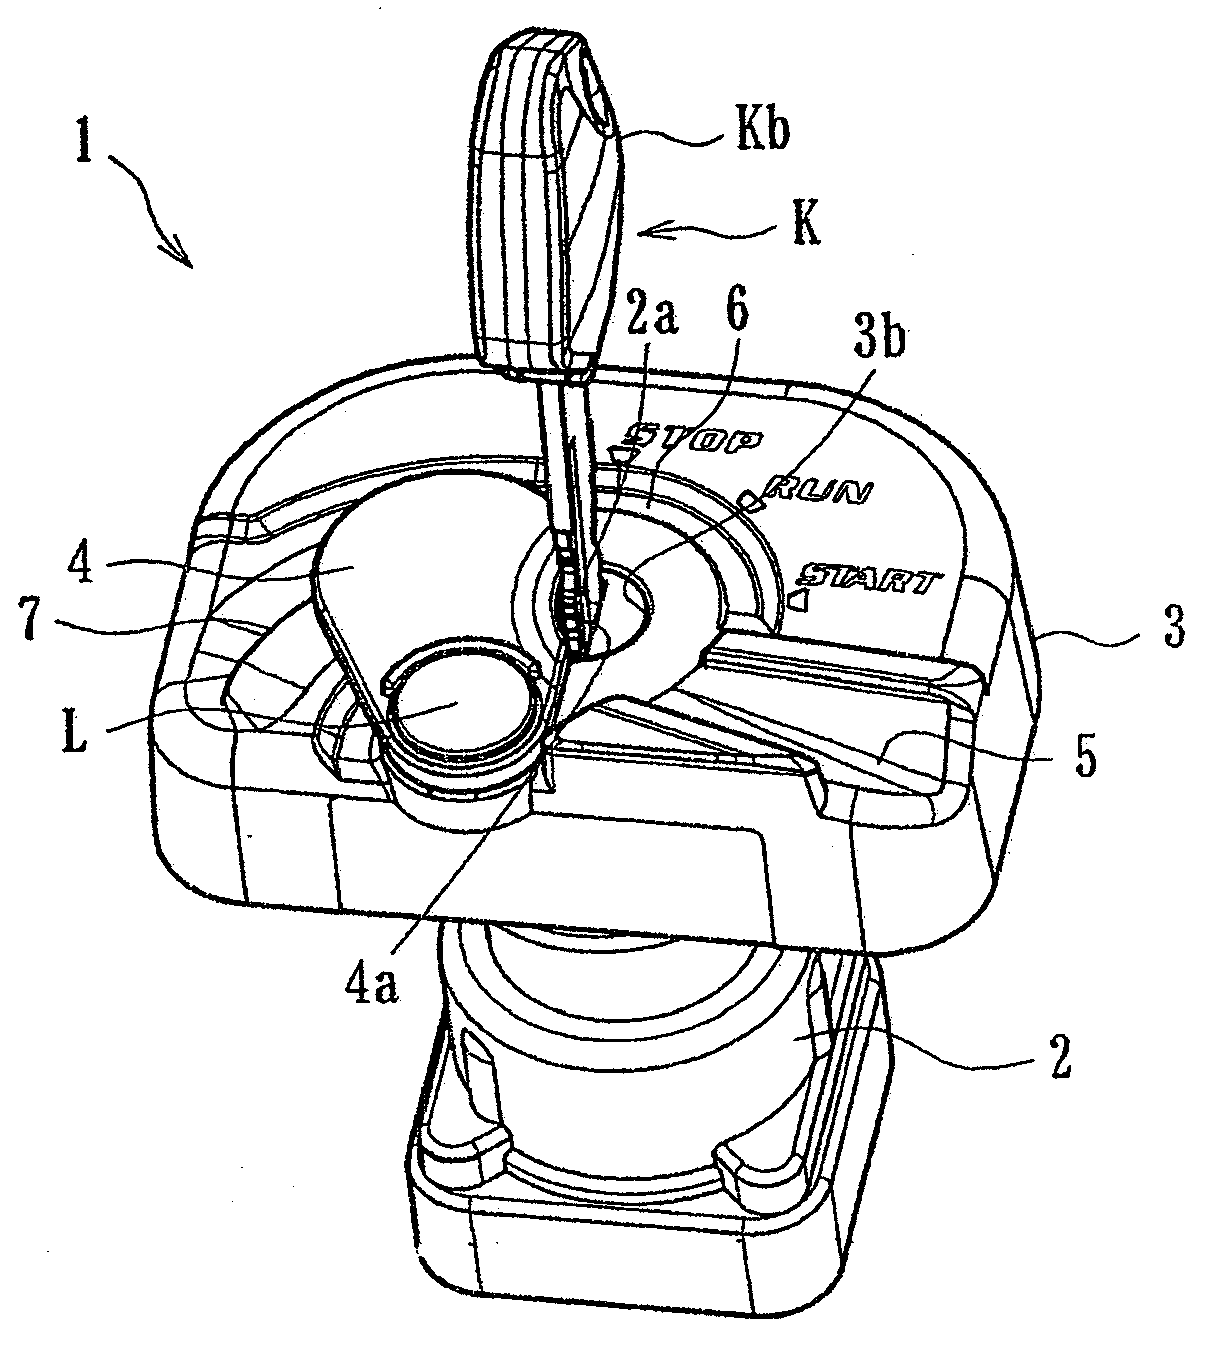 Ignition switch device